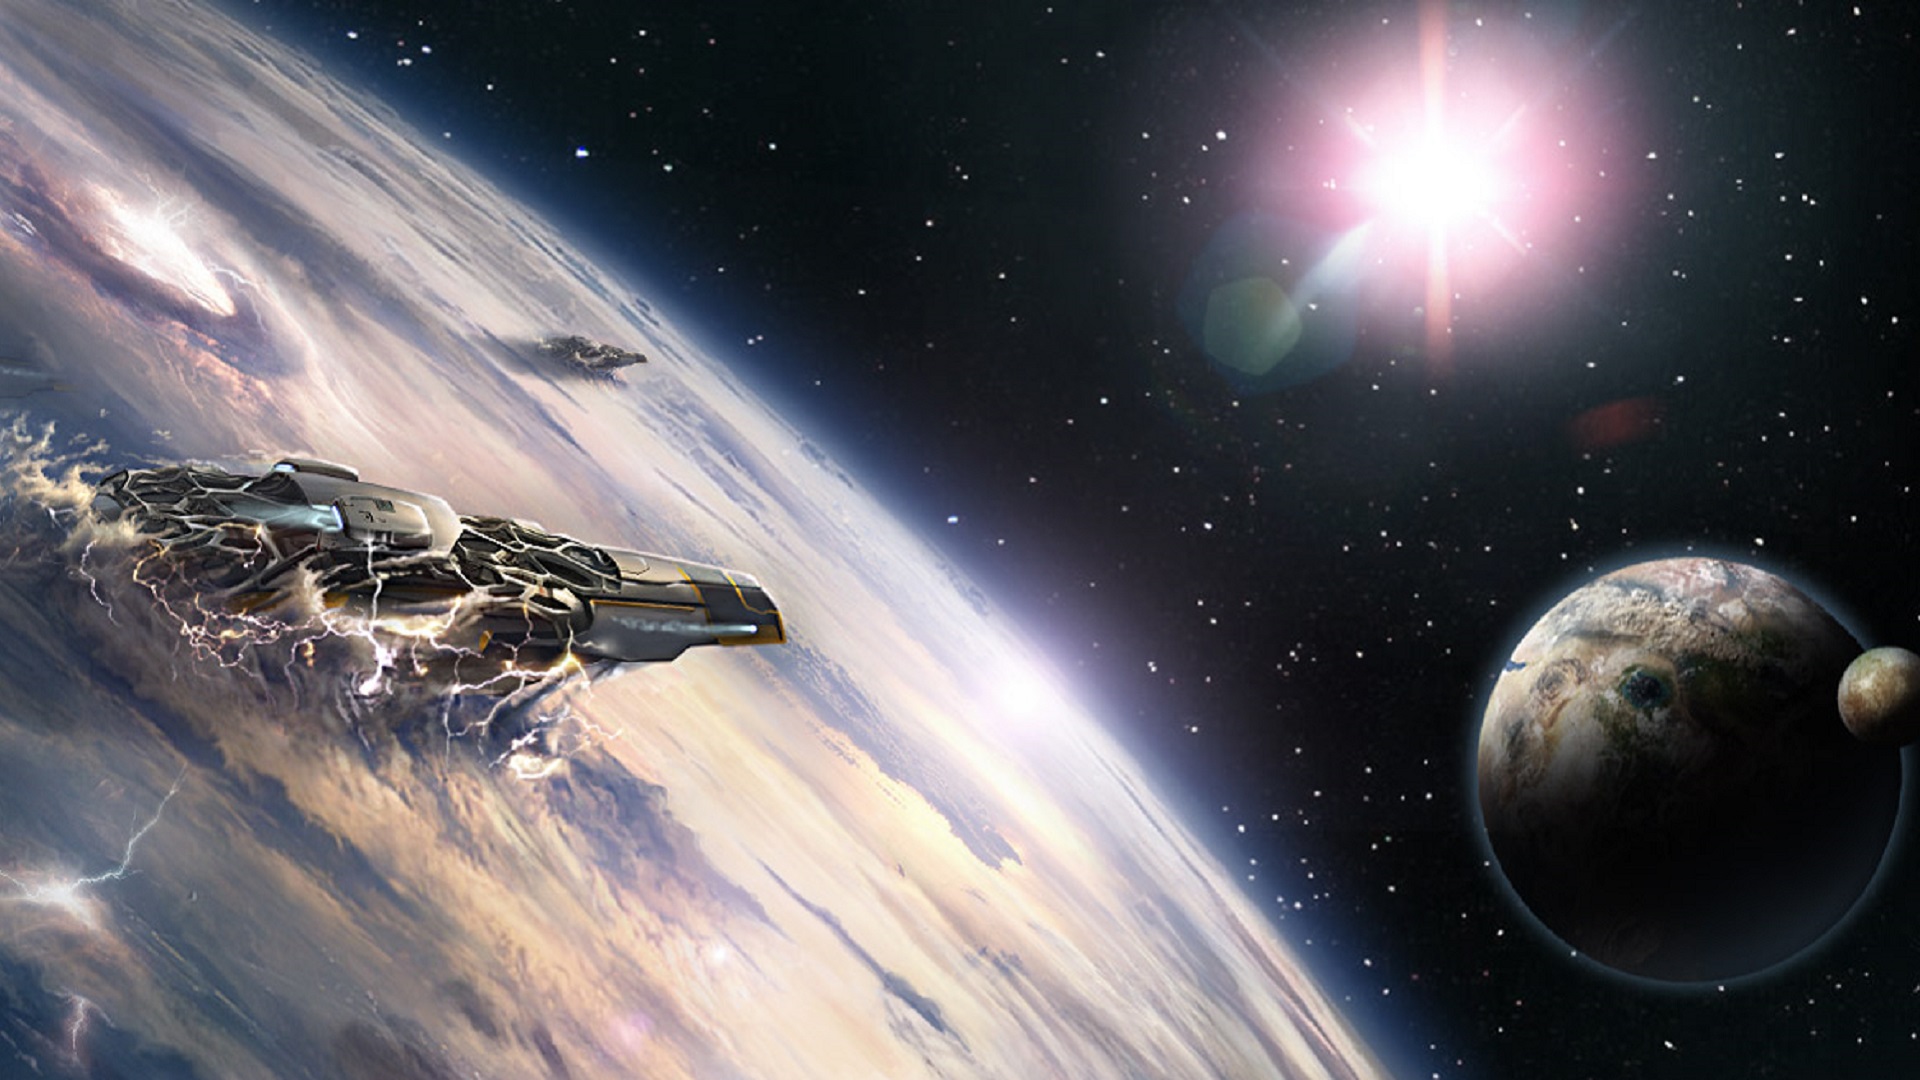 Star Citizen Hd Wallpaper - Best Pictures Of Space Ever , HD Wallpaper & Backgrounds